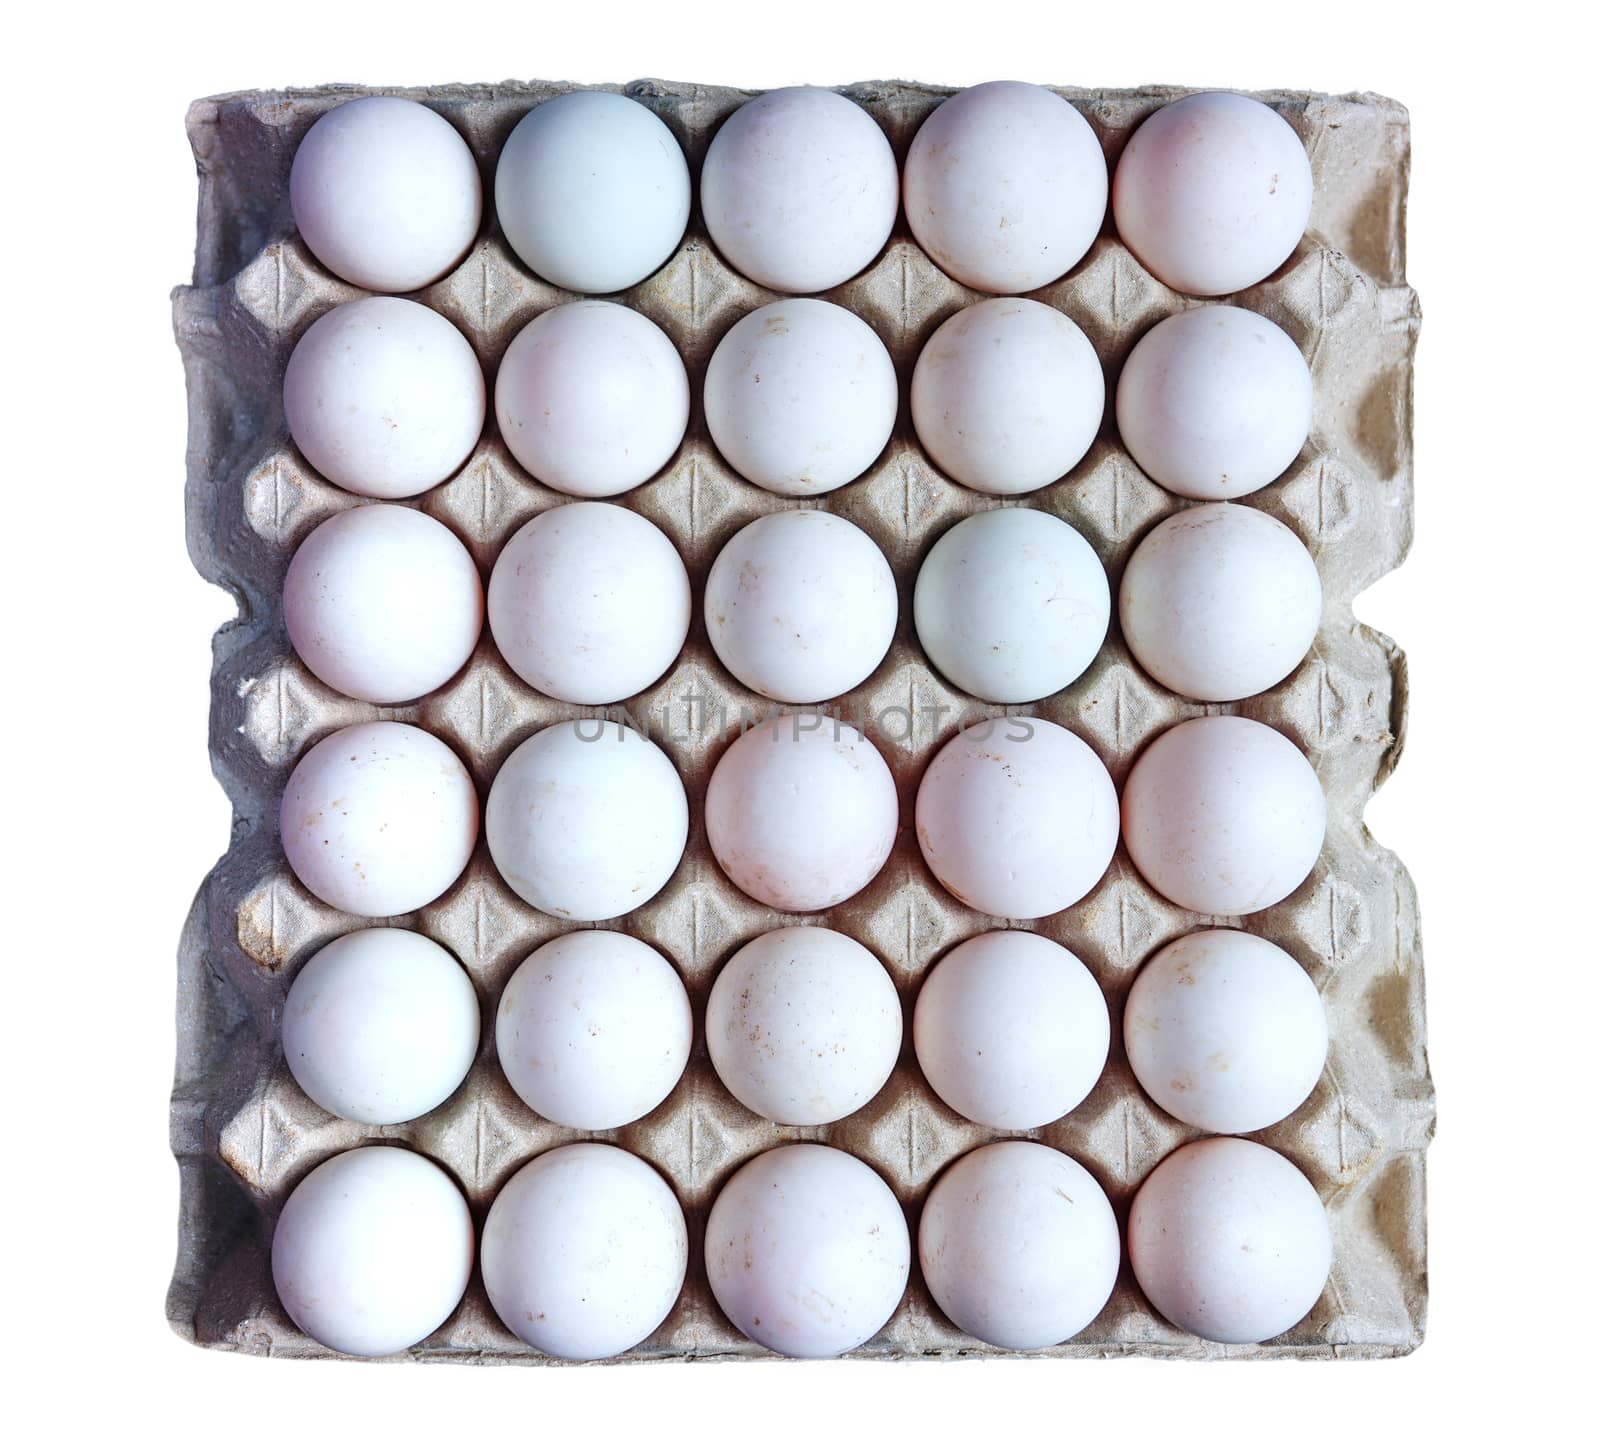 Fresh duck eggs collected from the farm are placed in a containe by noppha80